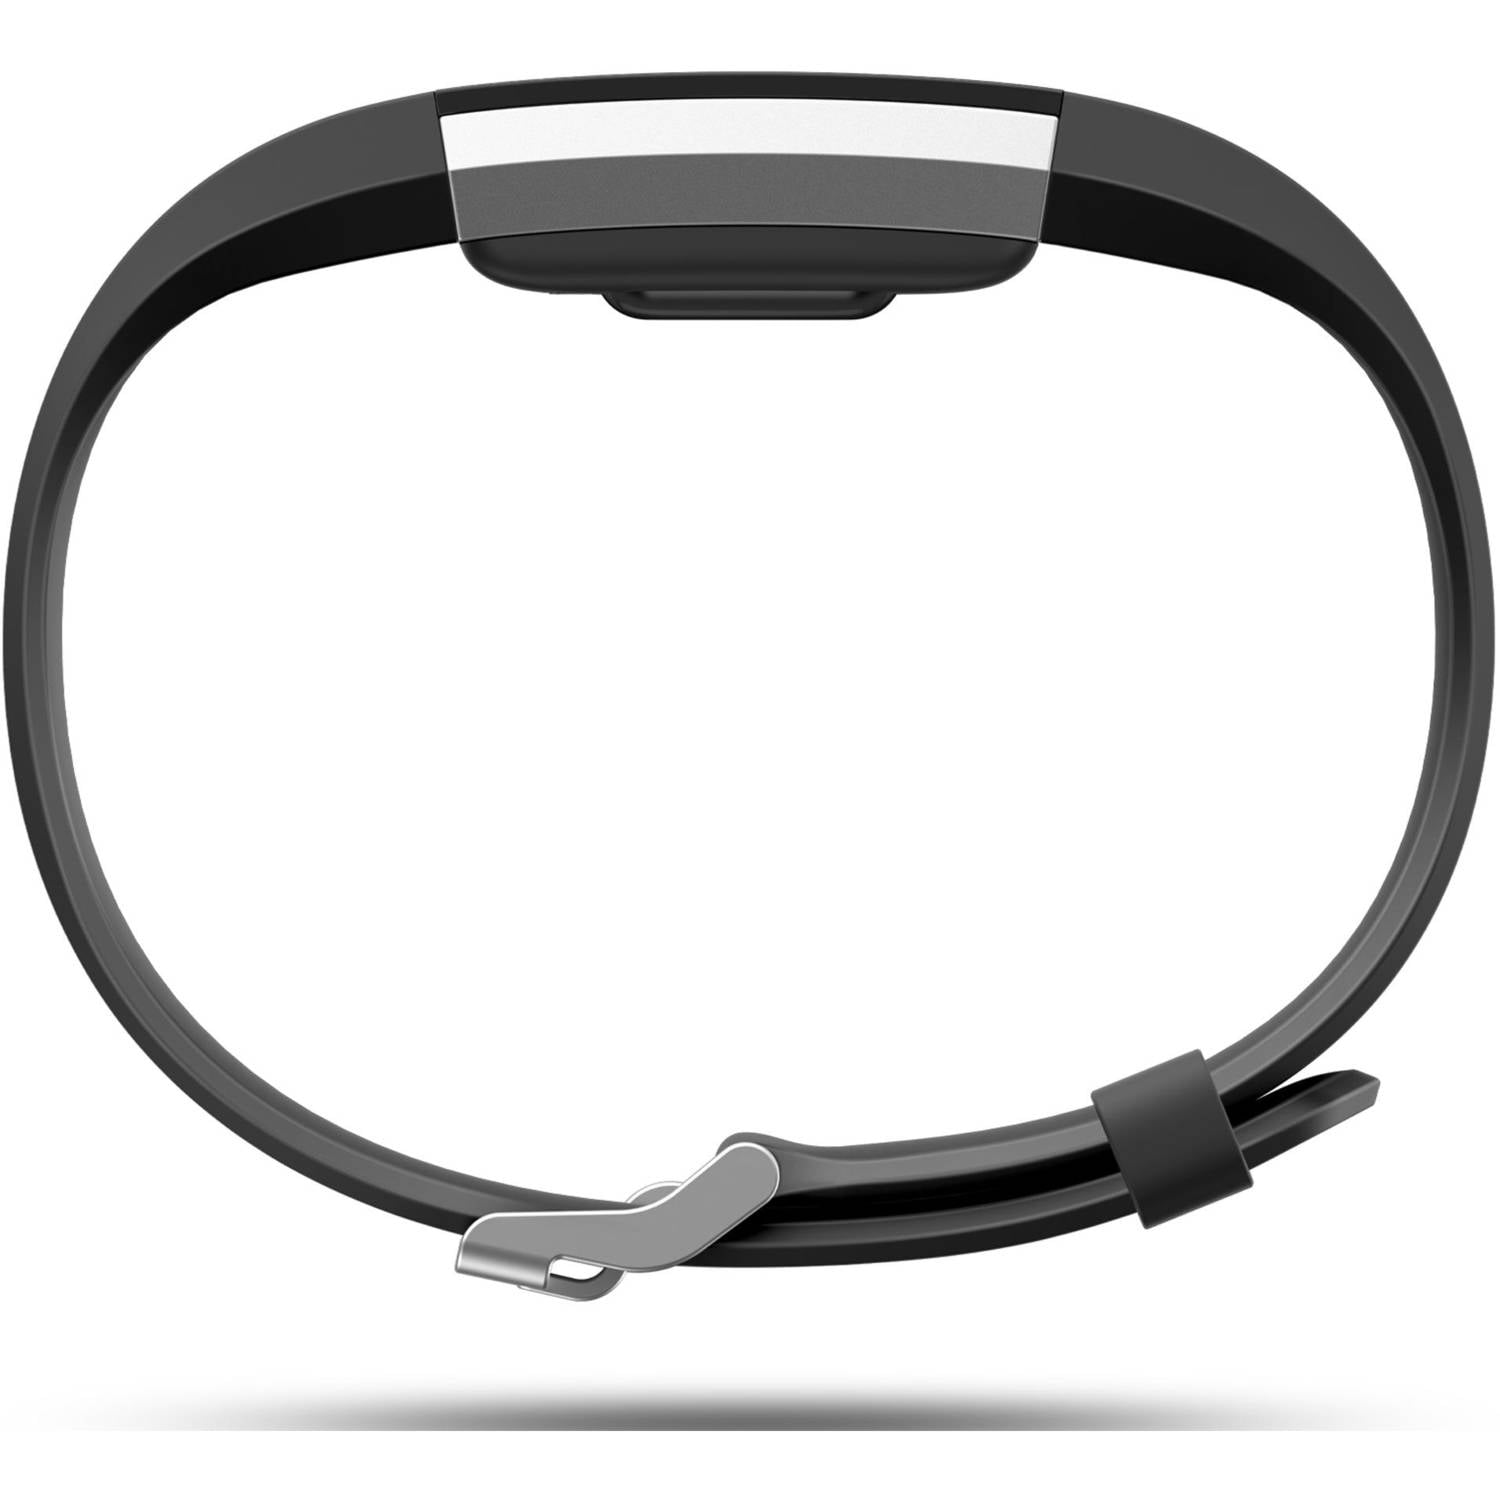 Fitbit Charge Tracker + Rate, Small - Walmart.com